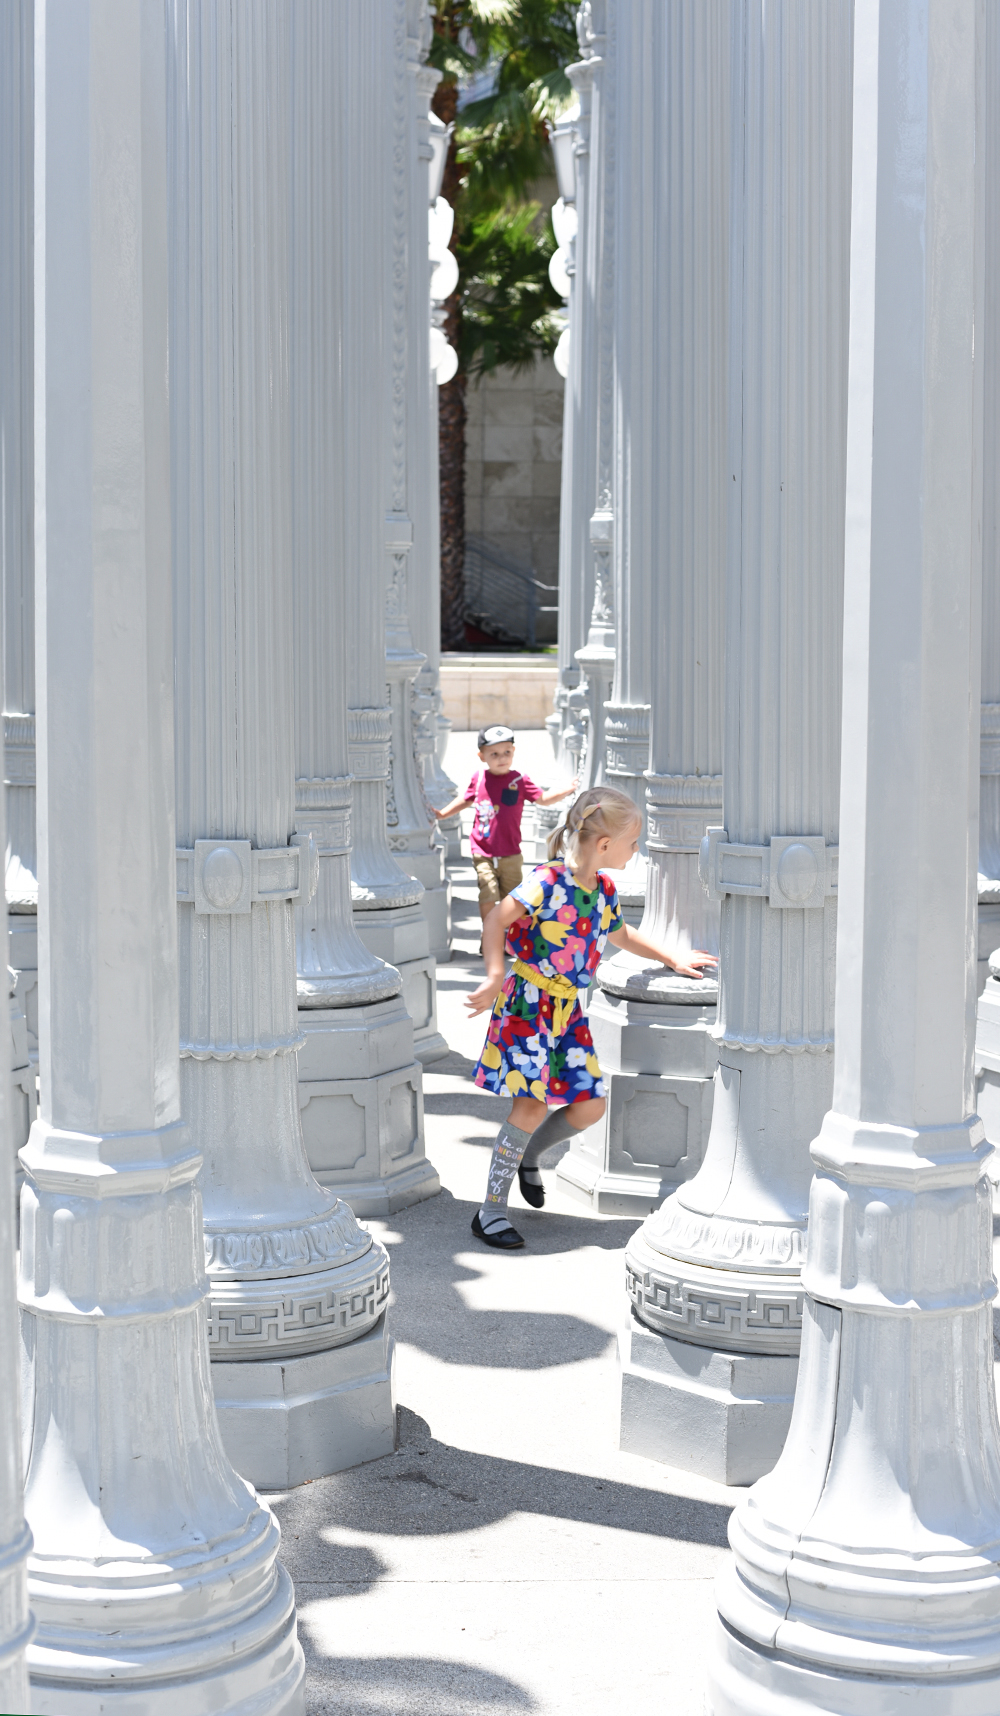 some highlights from our family trip to Los Angeles: LACMA